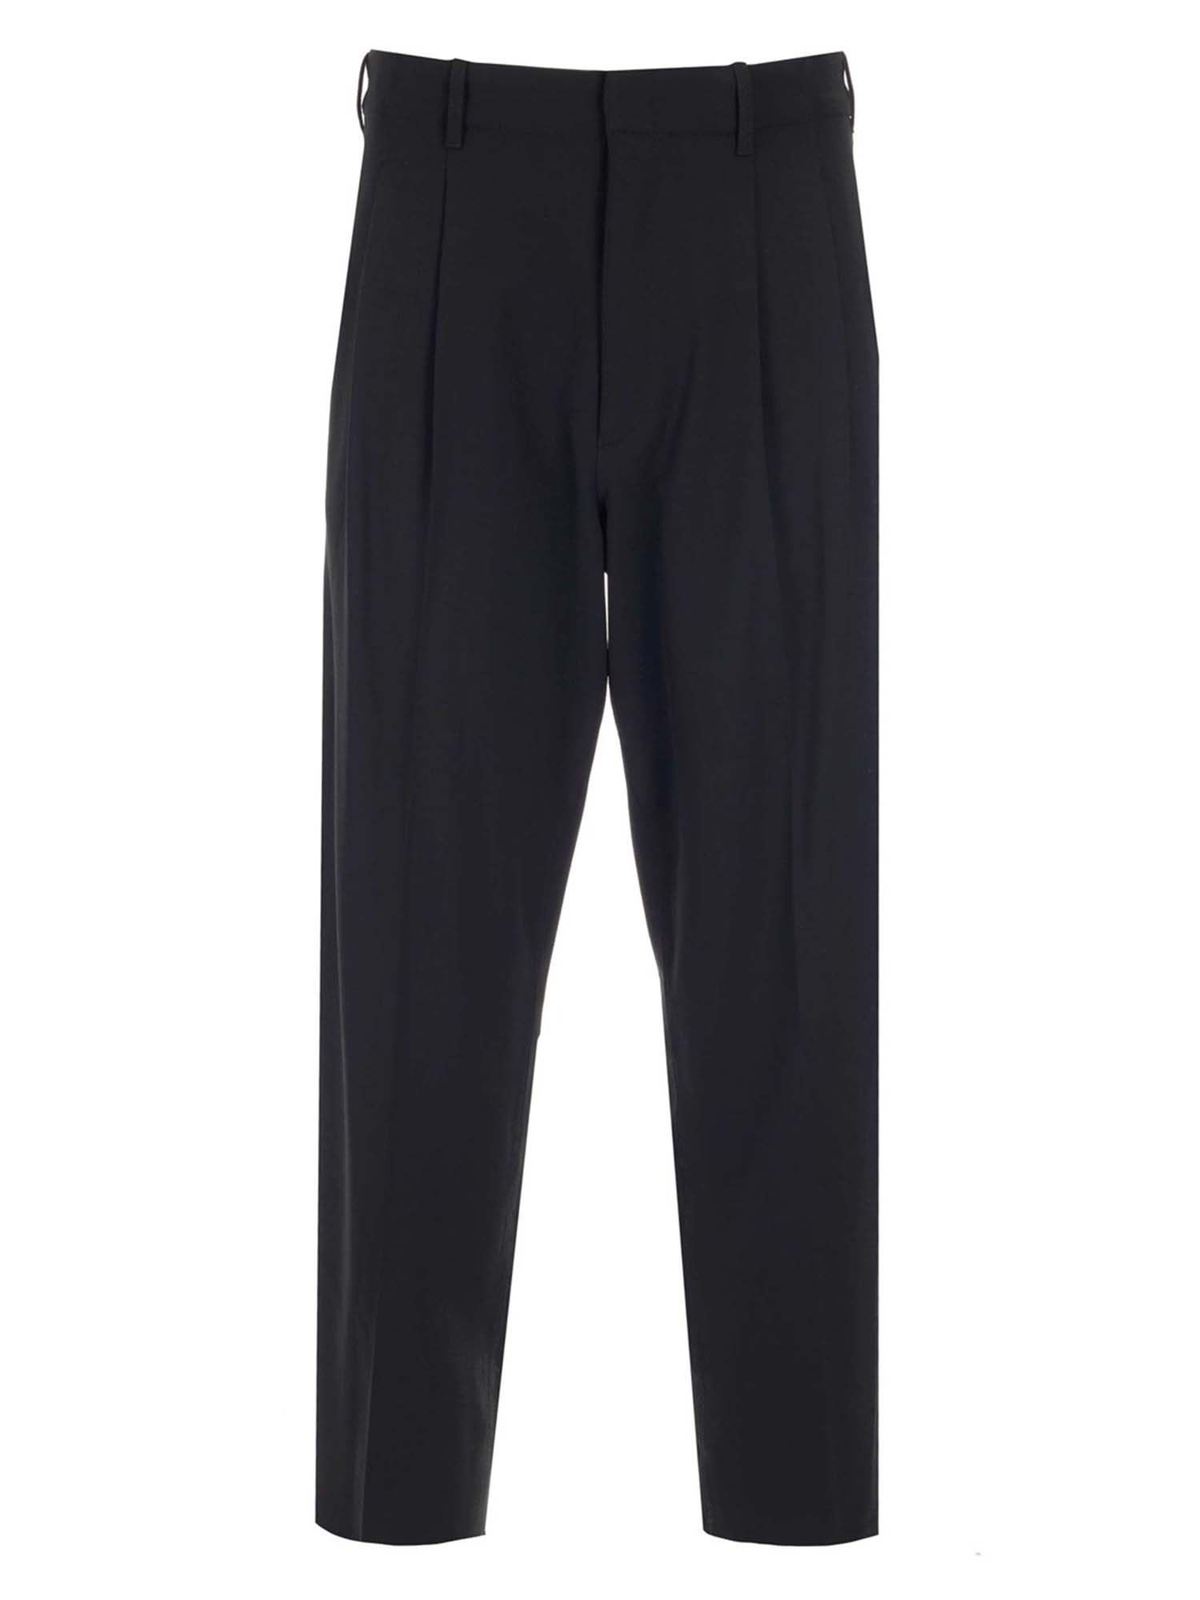 Ambush - Relaxed fit pants in black - Tailored & Formal trousers ...